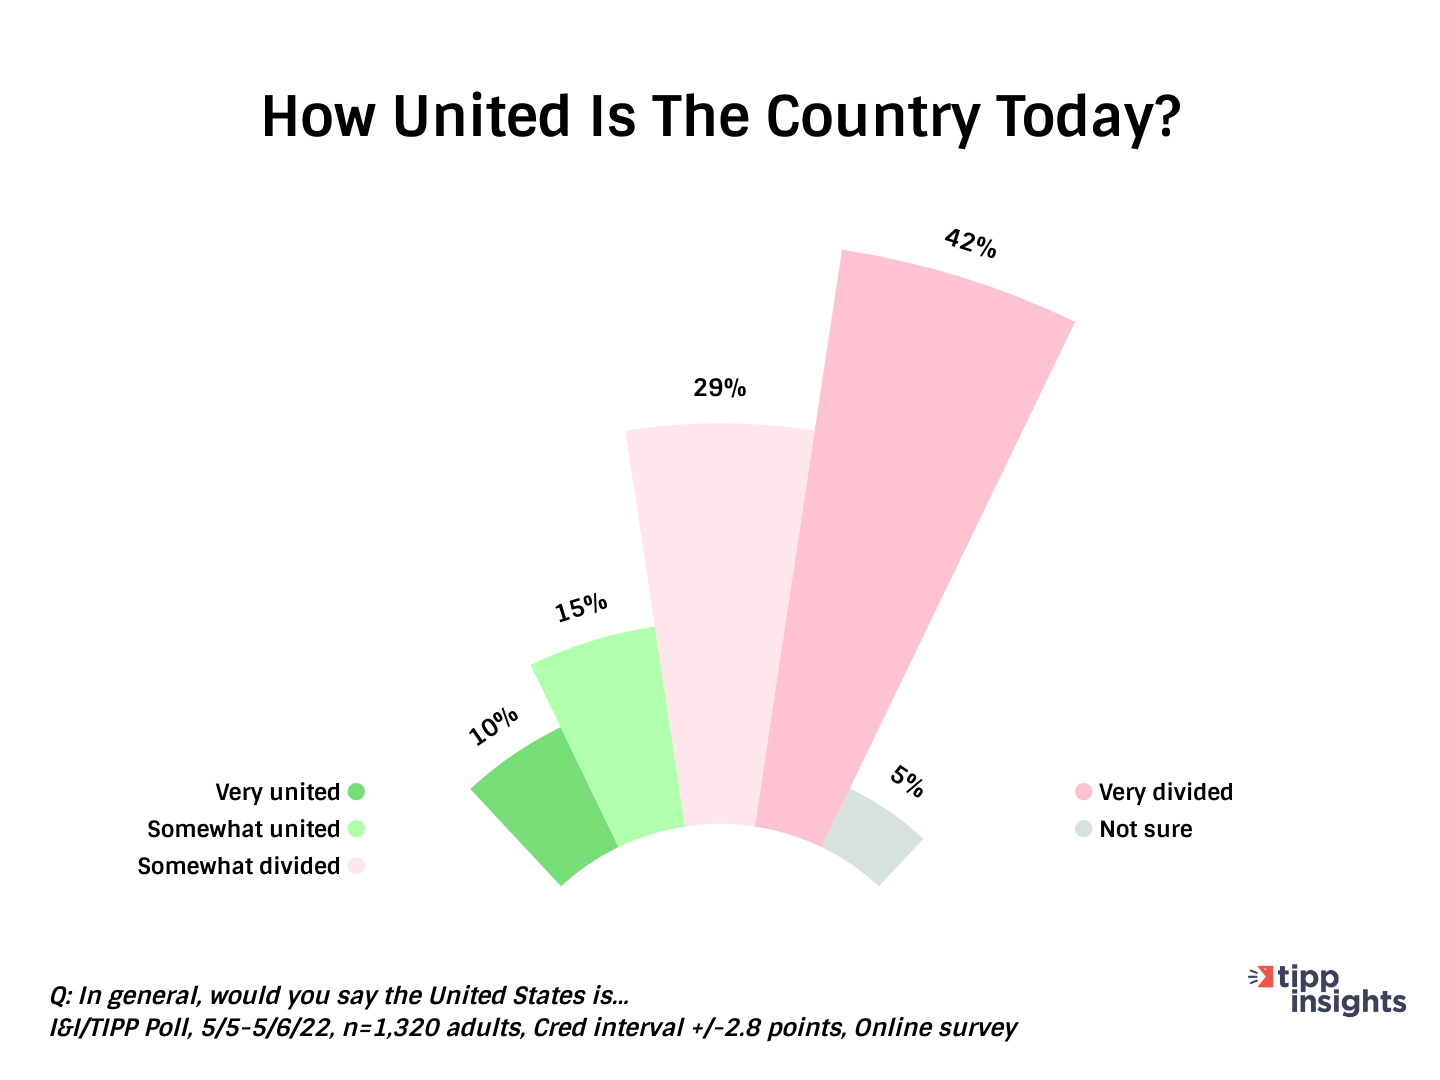 I&I/TIPP Poll: How united is the United States today